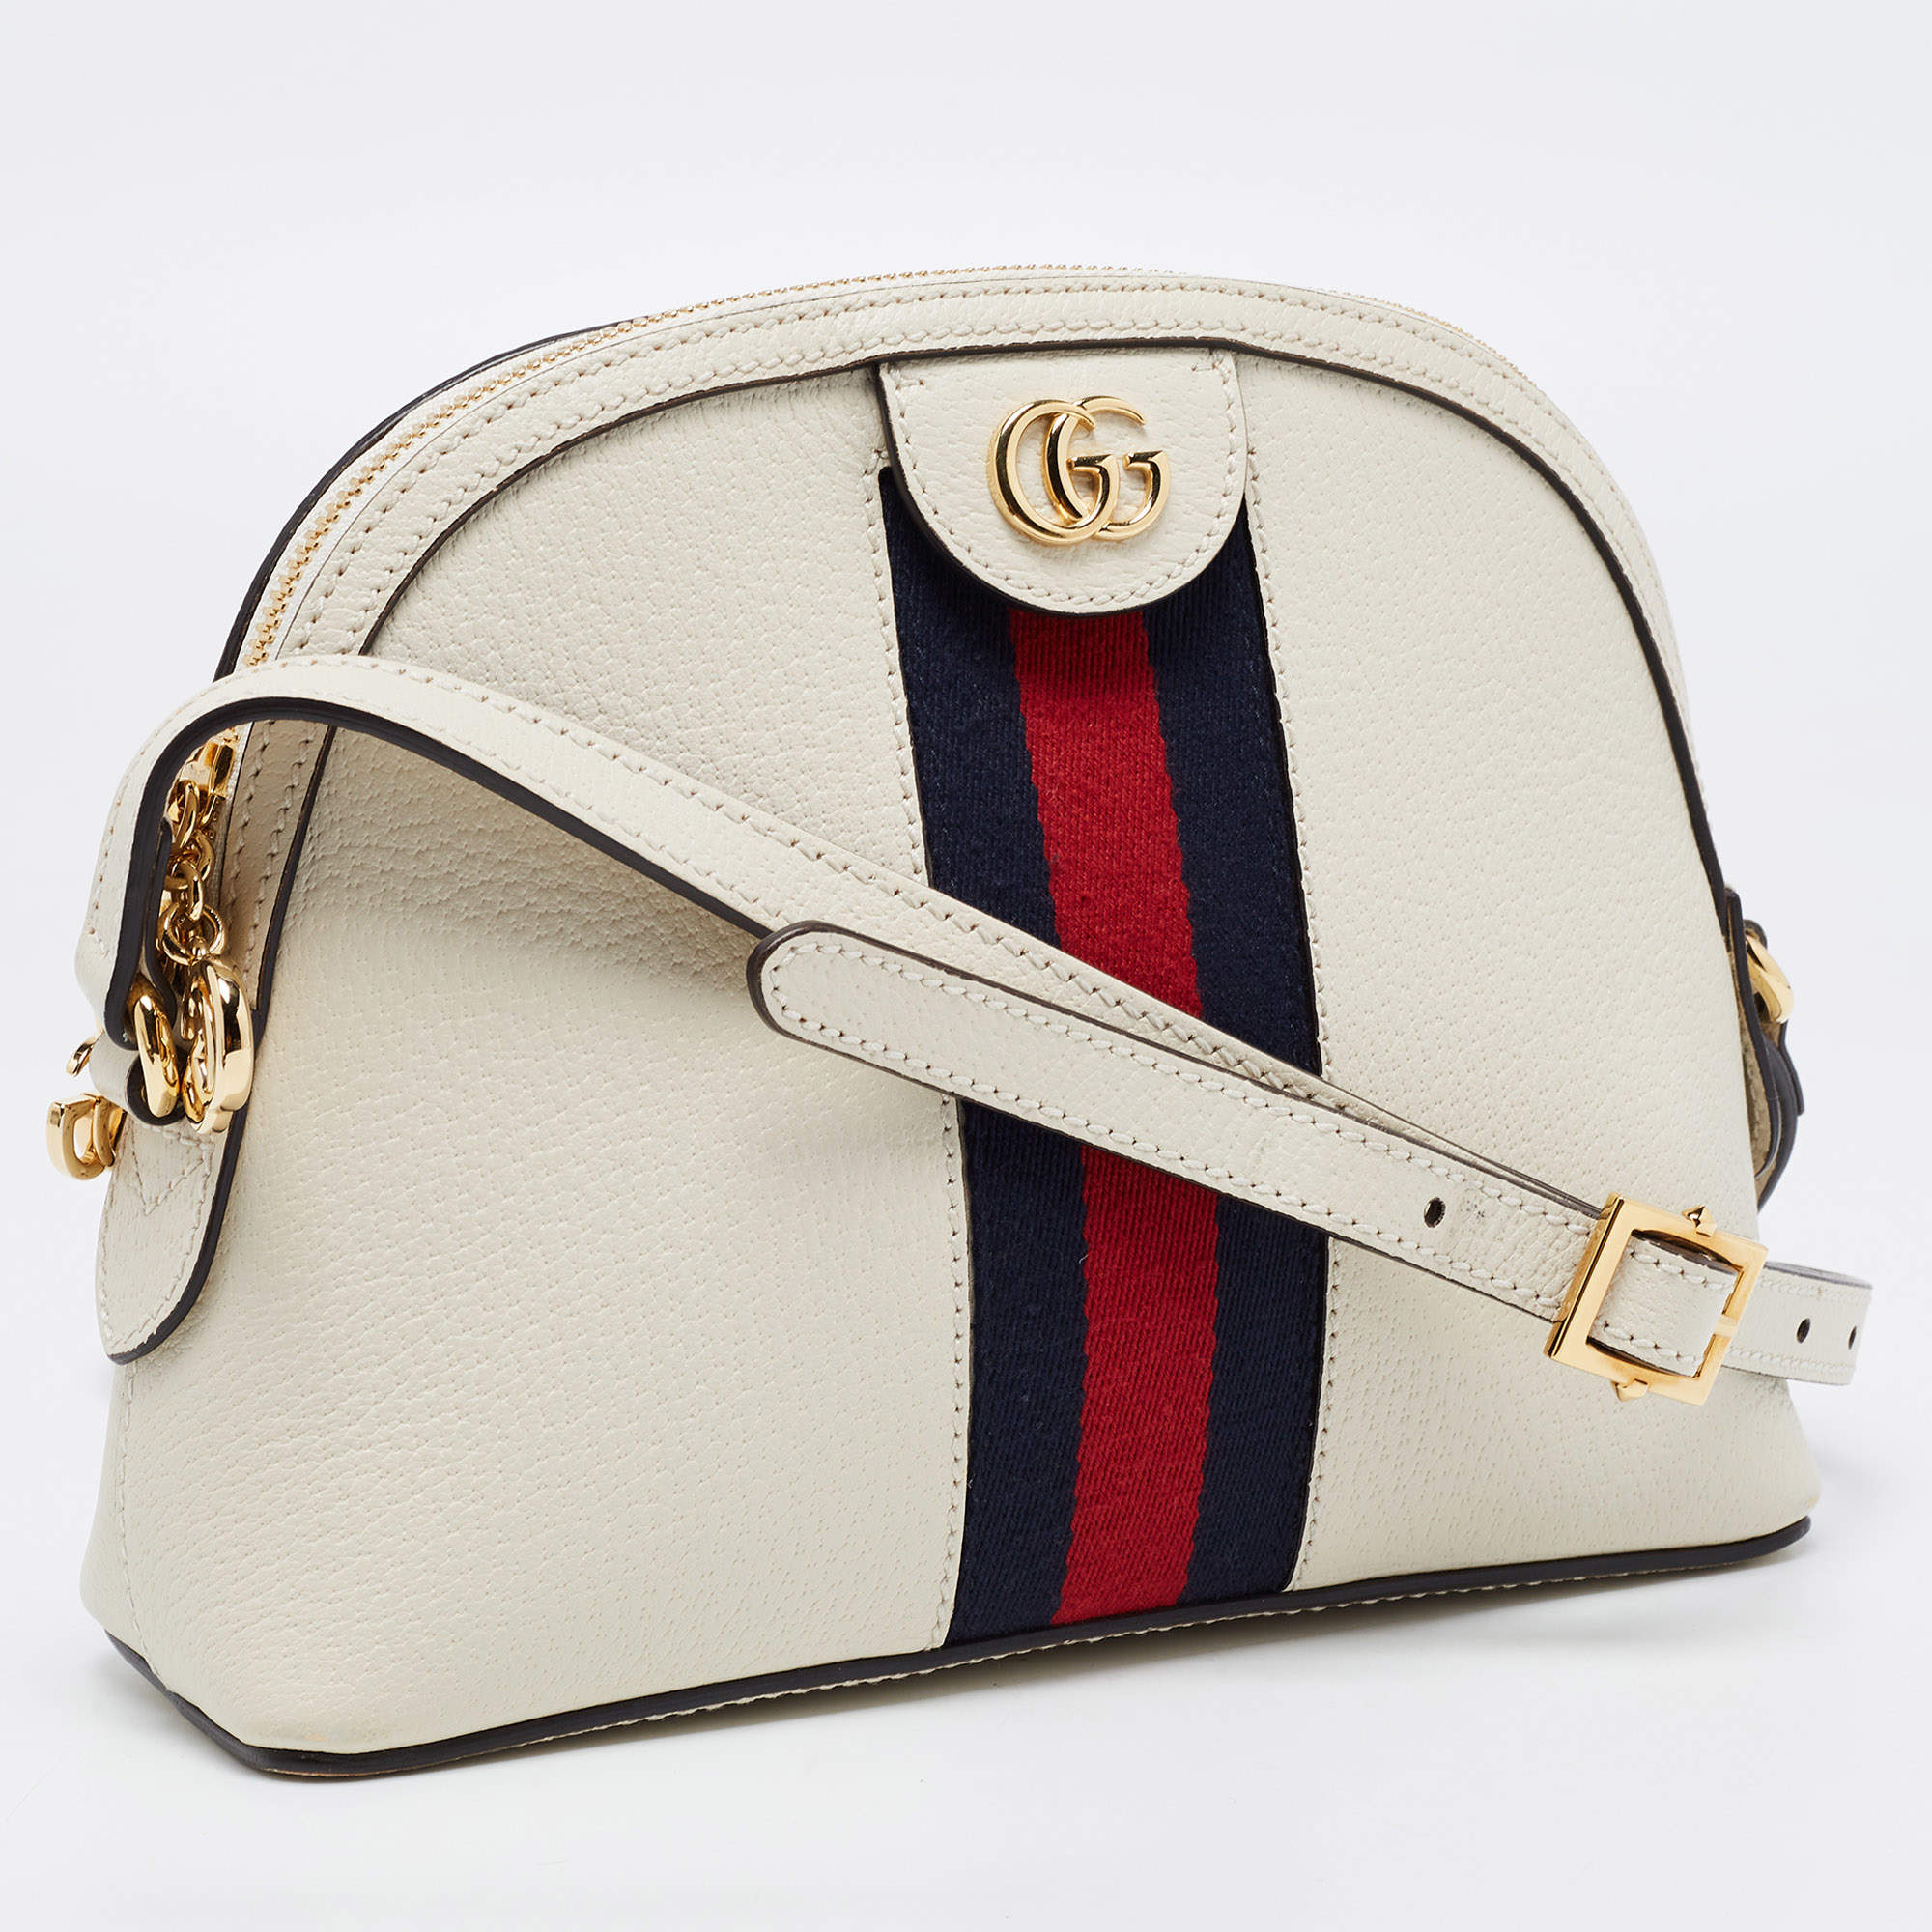 Gucci Ophidia GG Small Shoulder Bag replica - Affordable Luxury Bags